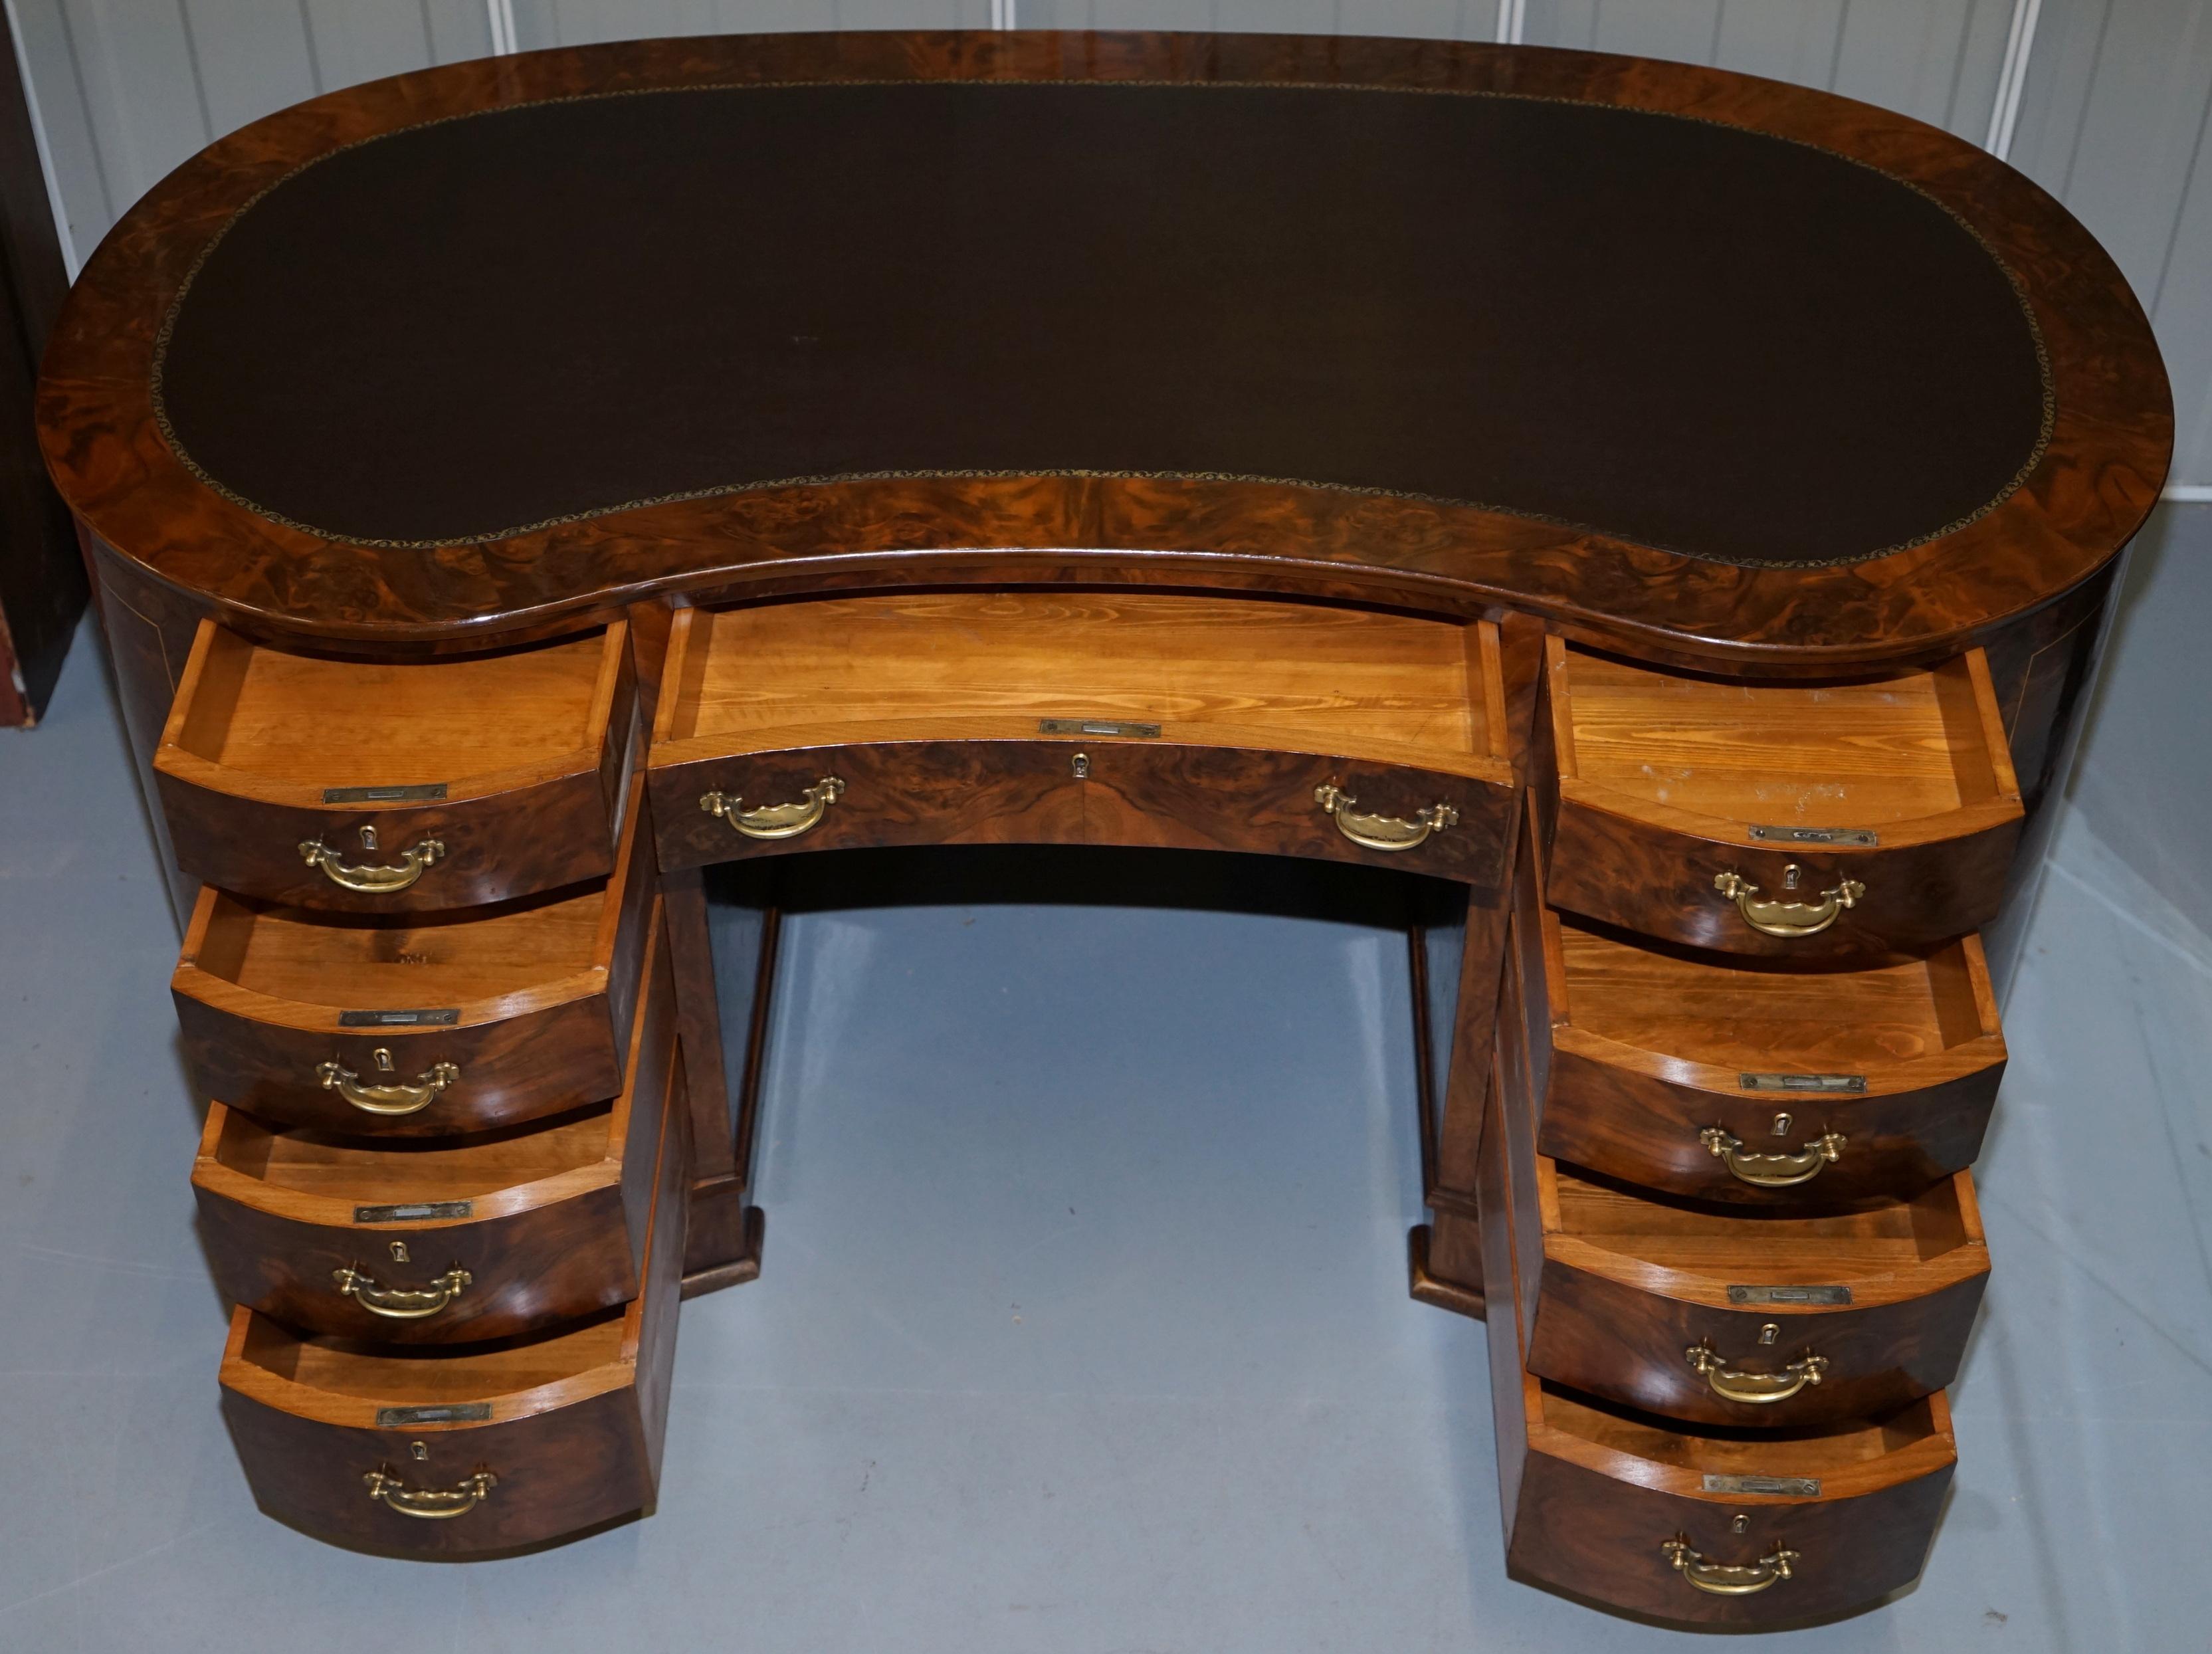 Rare Vintage Burr & Burl Walnut Kidney Desk with Cupboards Bookcases to the Back 13